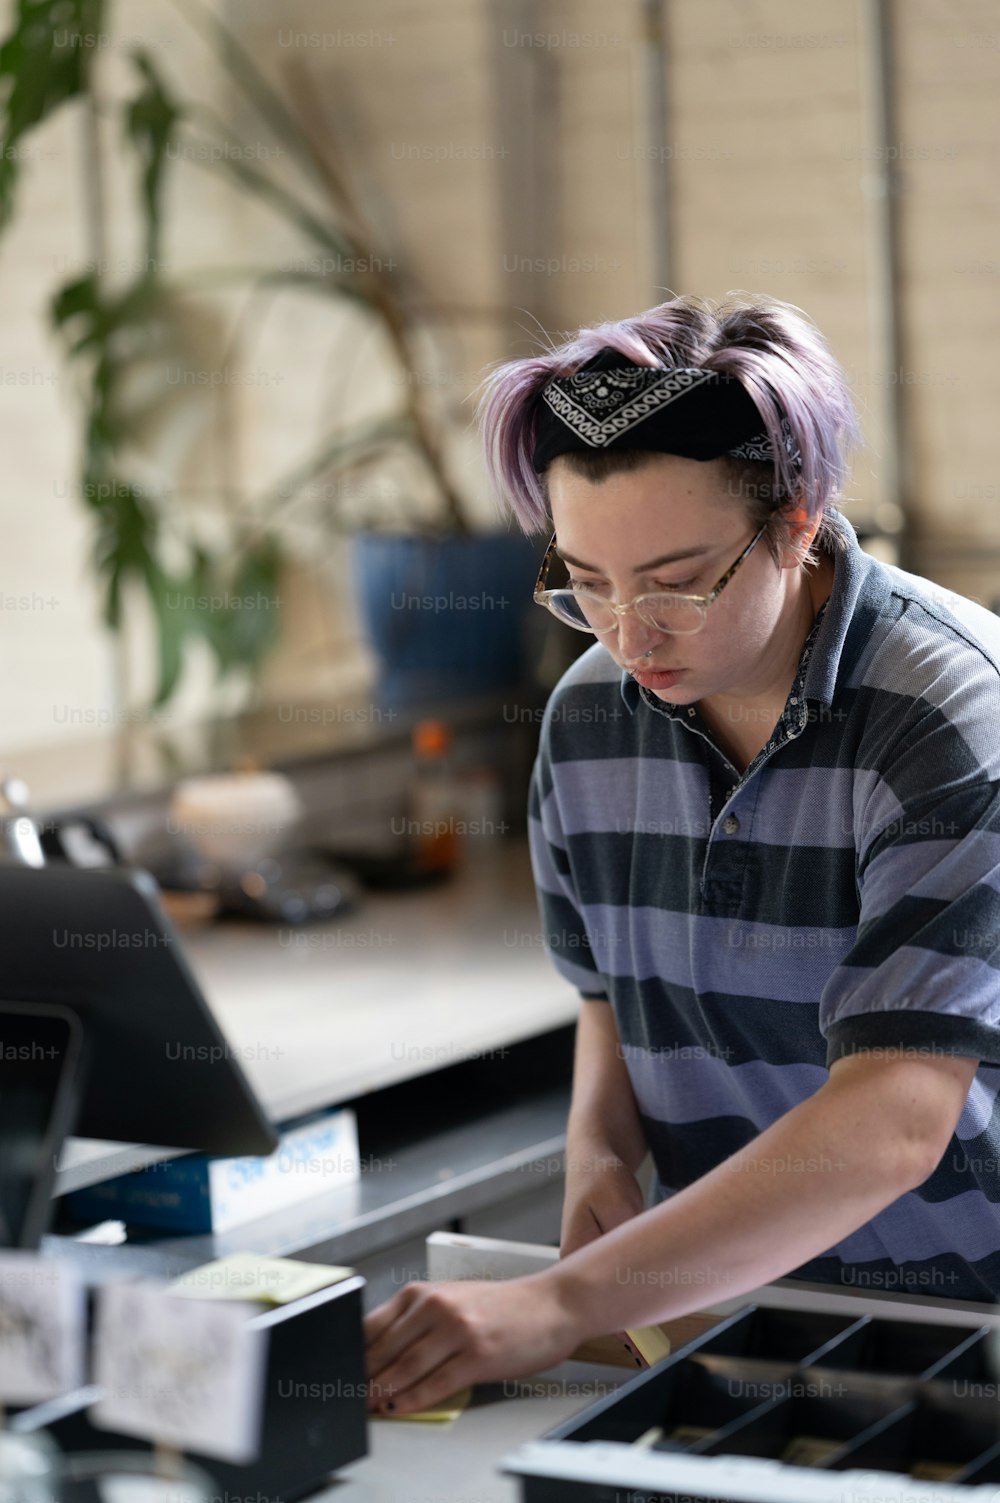 a man with purple hair is working on a computer